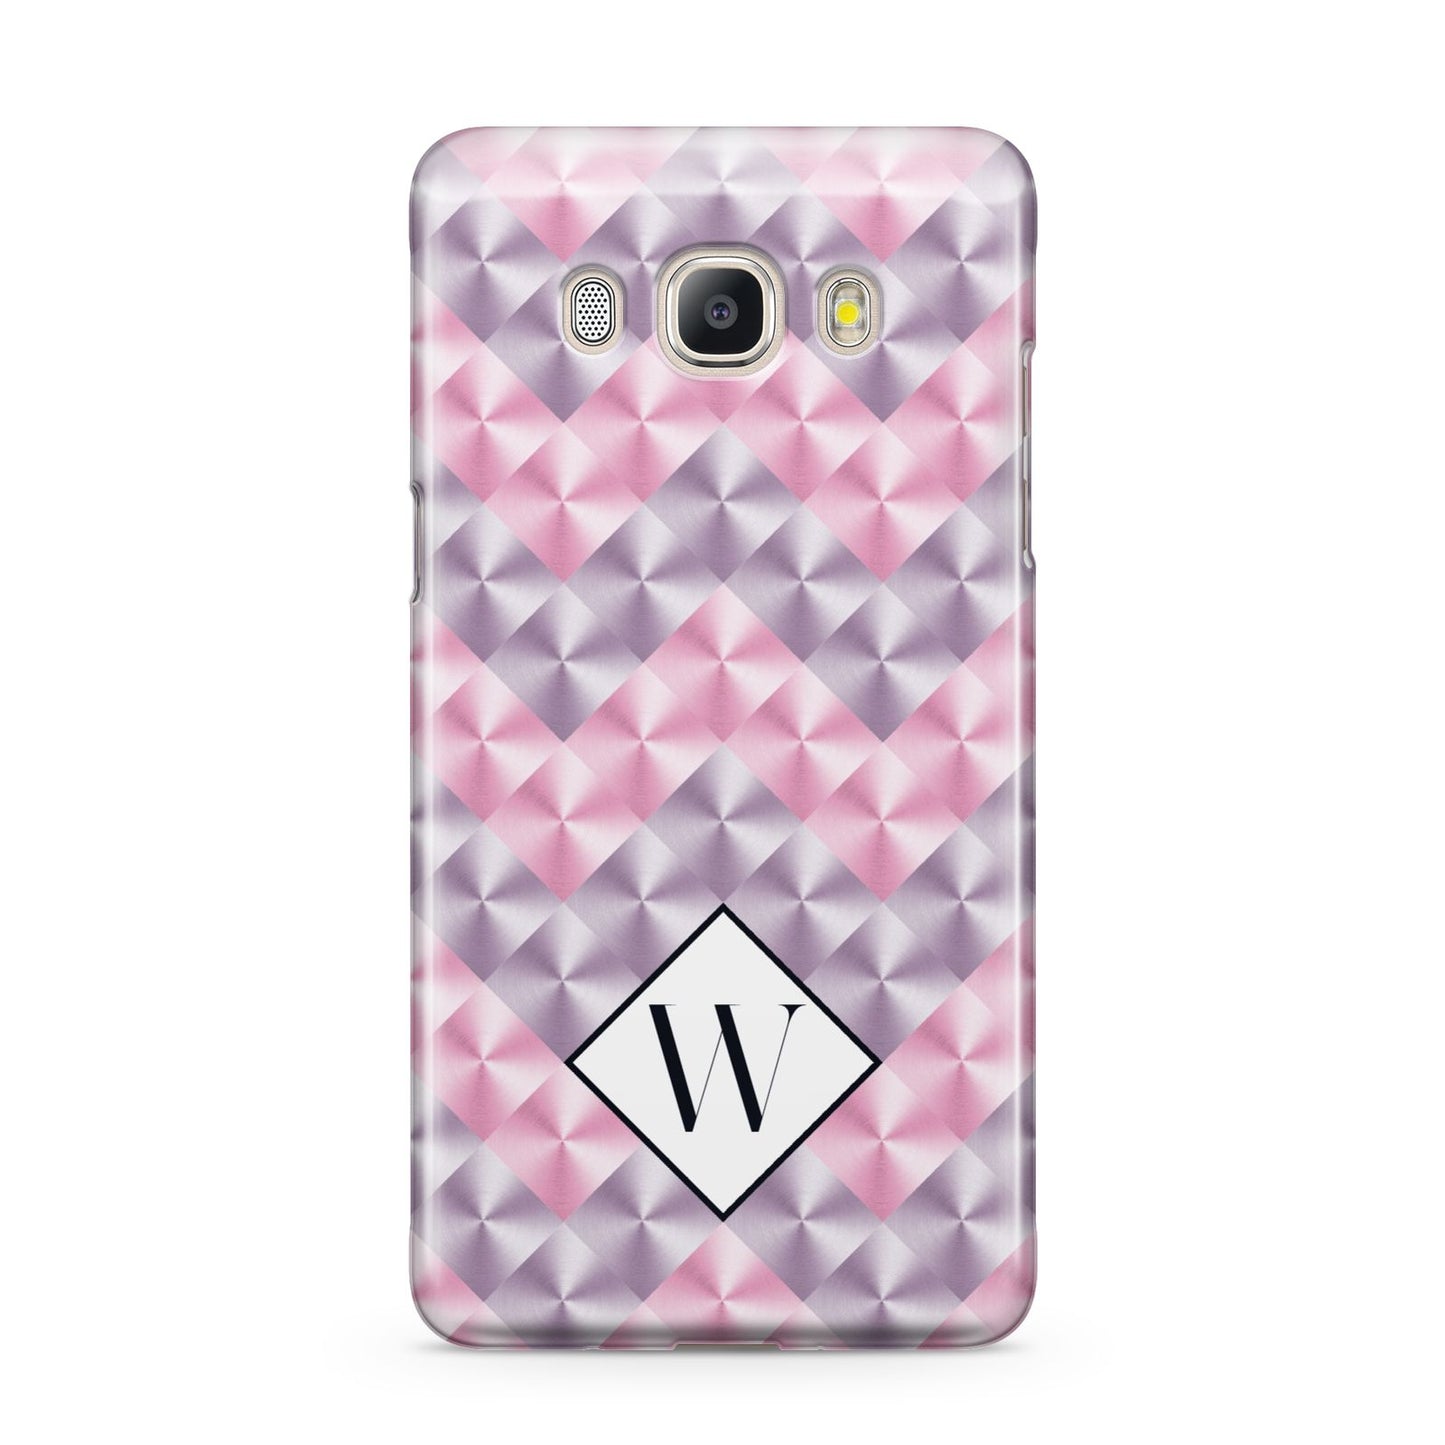 Personalised Mother Of Pearl Monogram Letter Samsung Galaxy J5 2016 Case